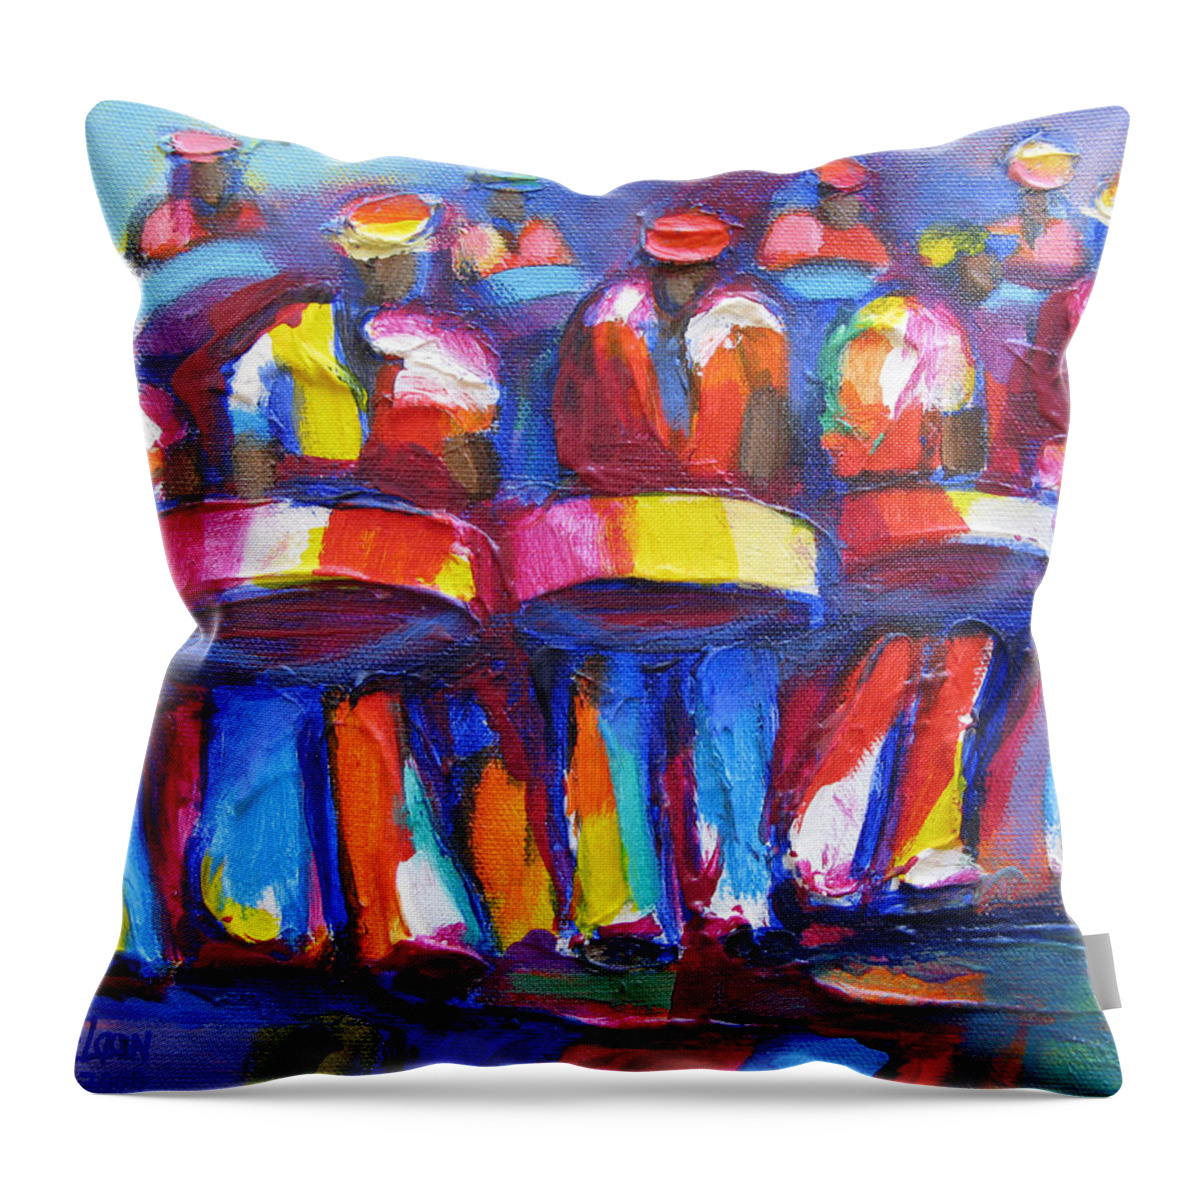 Steel Throw Pillow featuring the painting Steel Pan by Cynthia McLean